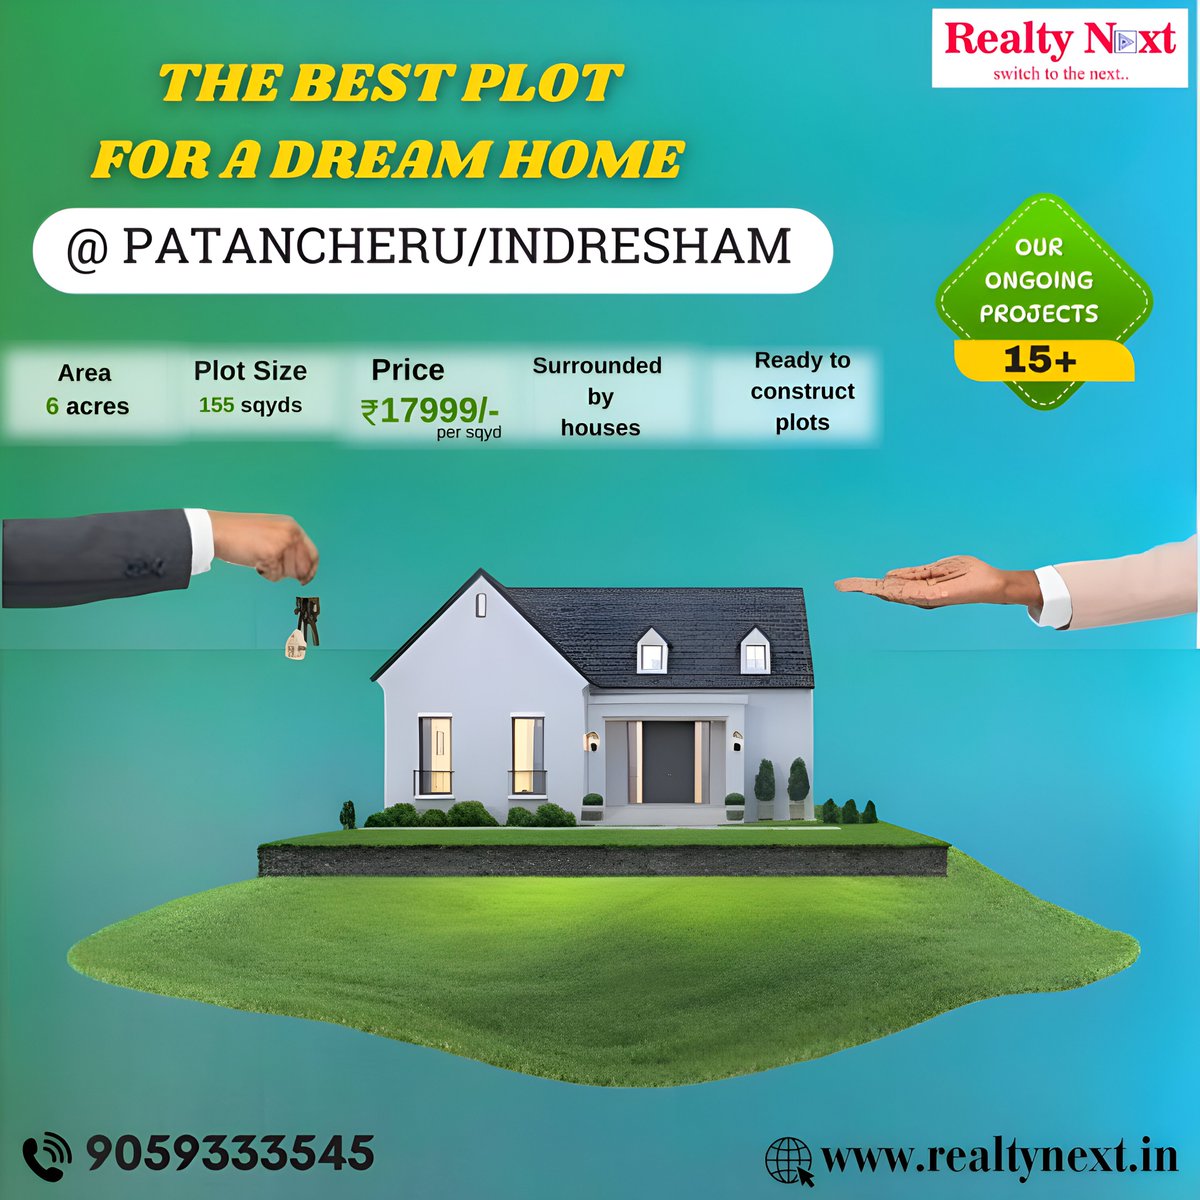 Open Plots for Sale at Patancheru, Indresham!
#realtynext #RealEstate #Hyderabad #flats #investment #property #Reels #Trending #famous #landofthelustrous #Landsat #Telangana #buyingconent #investing #famoustwt #news #offers #RERA #VIP #kadthalhomes #homes